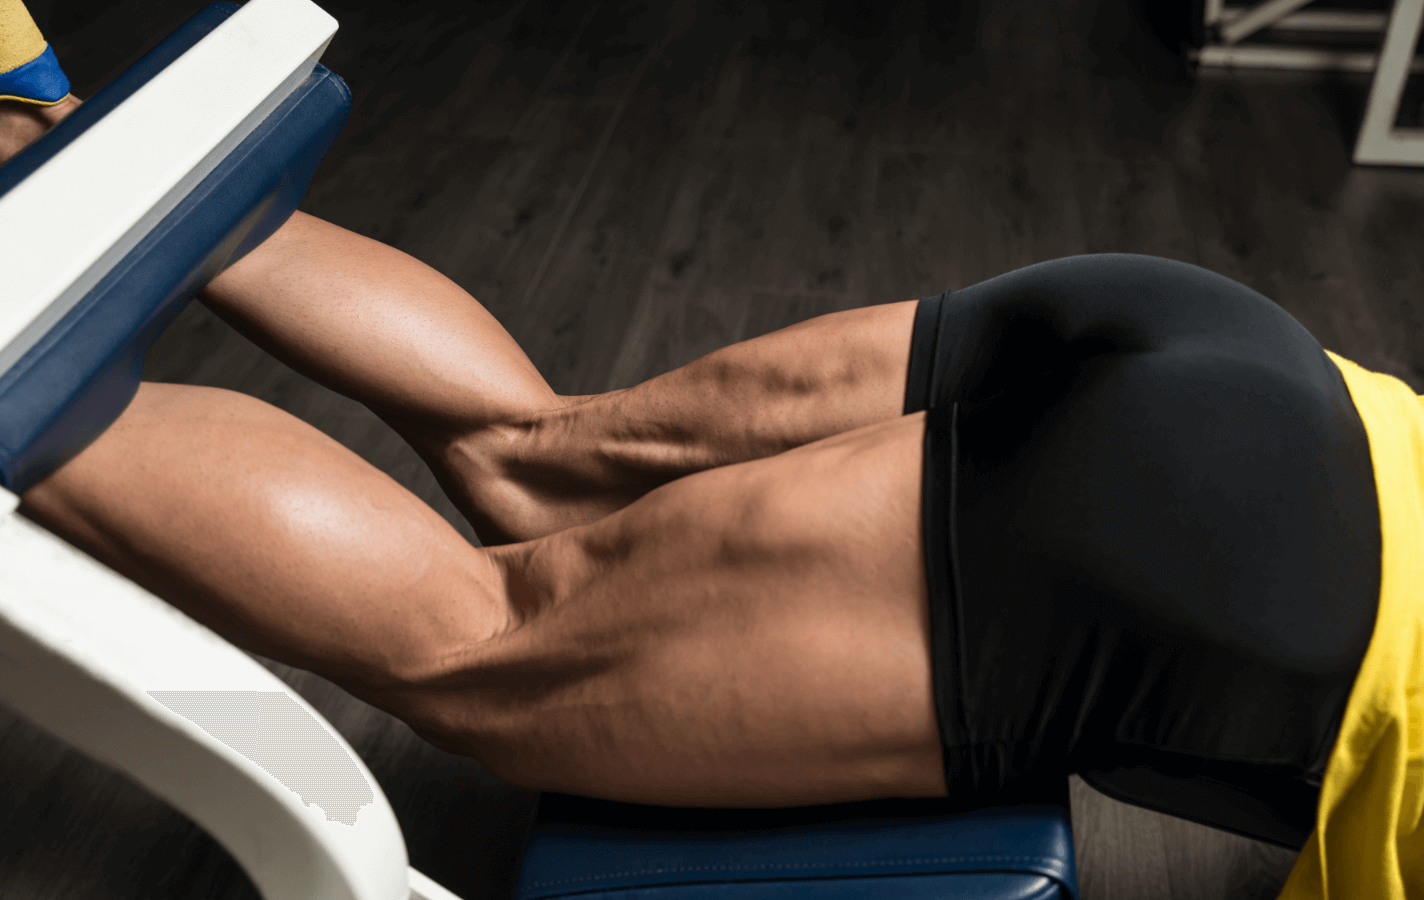 Hamstring Training for Women: How to Optimize Volume and Results